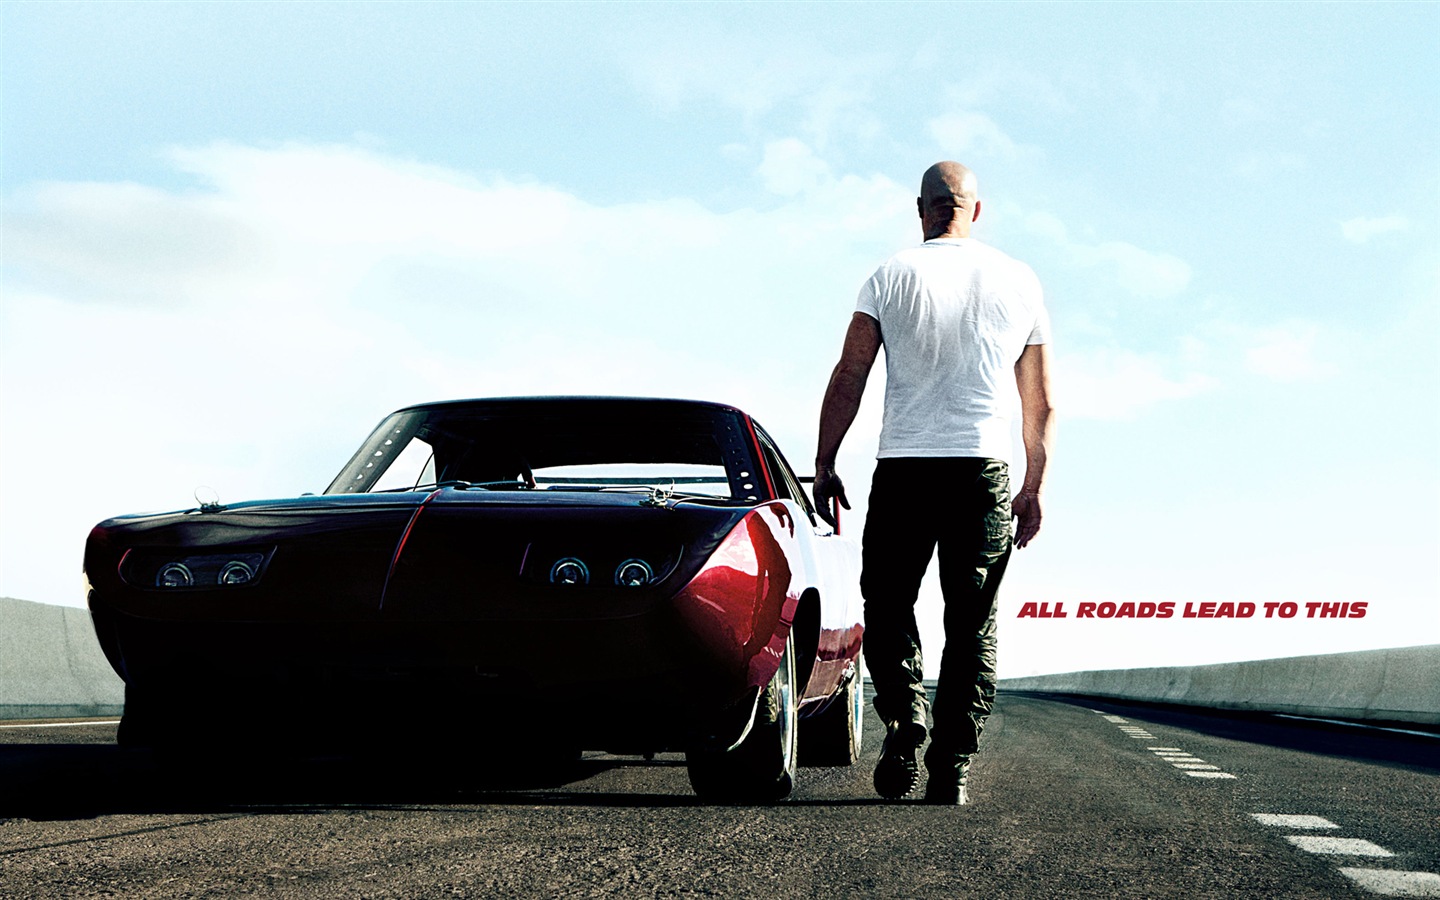 Fast And Furious 6 HD movie wallpapers #11 - 1440x900